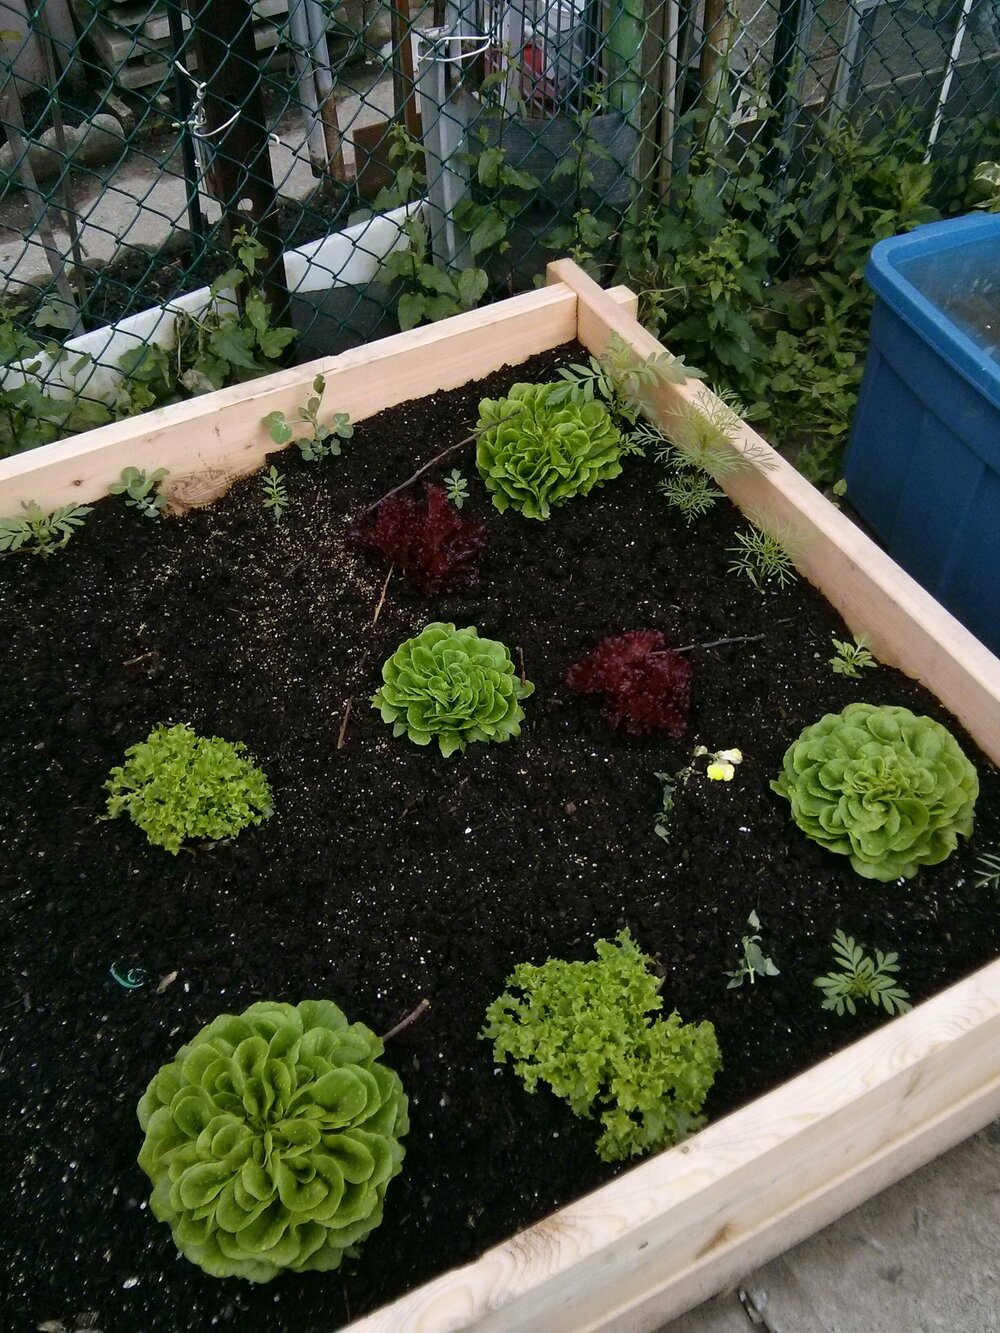 Lettuce in a raised bed